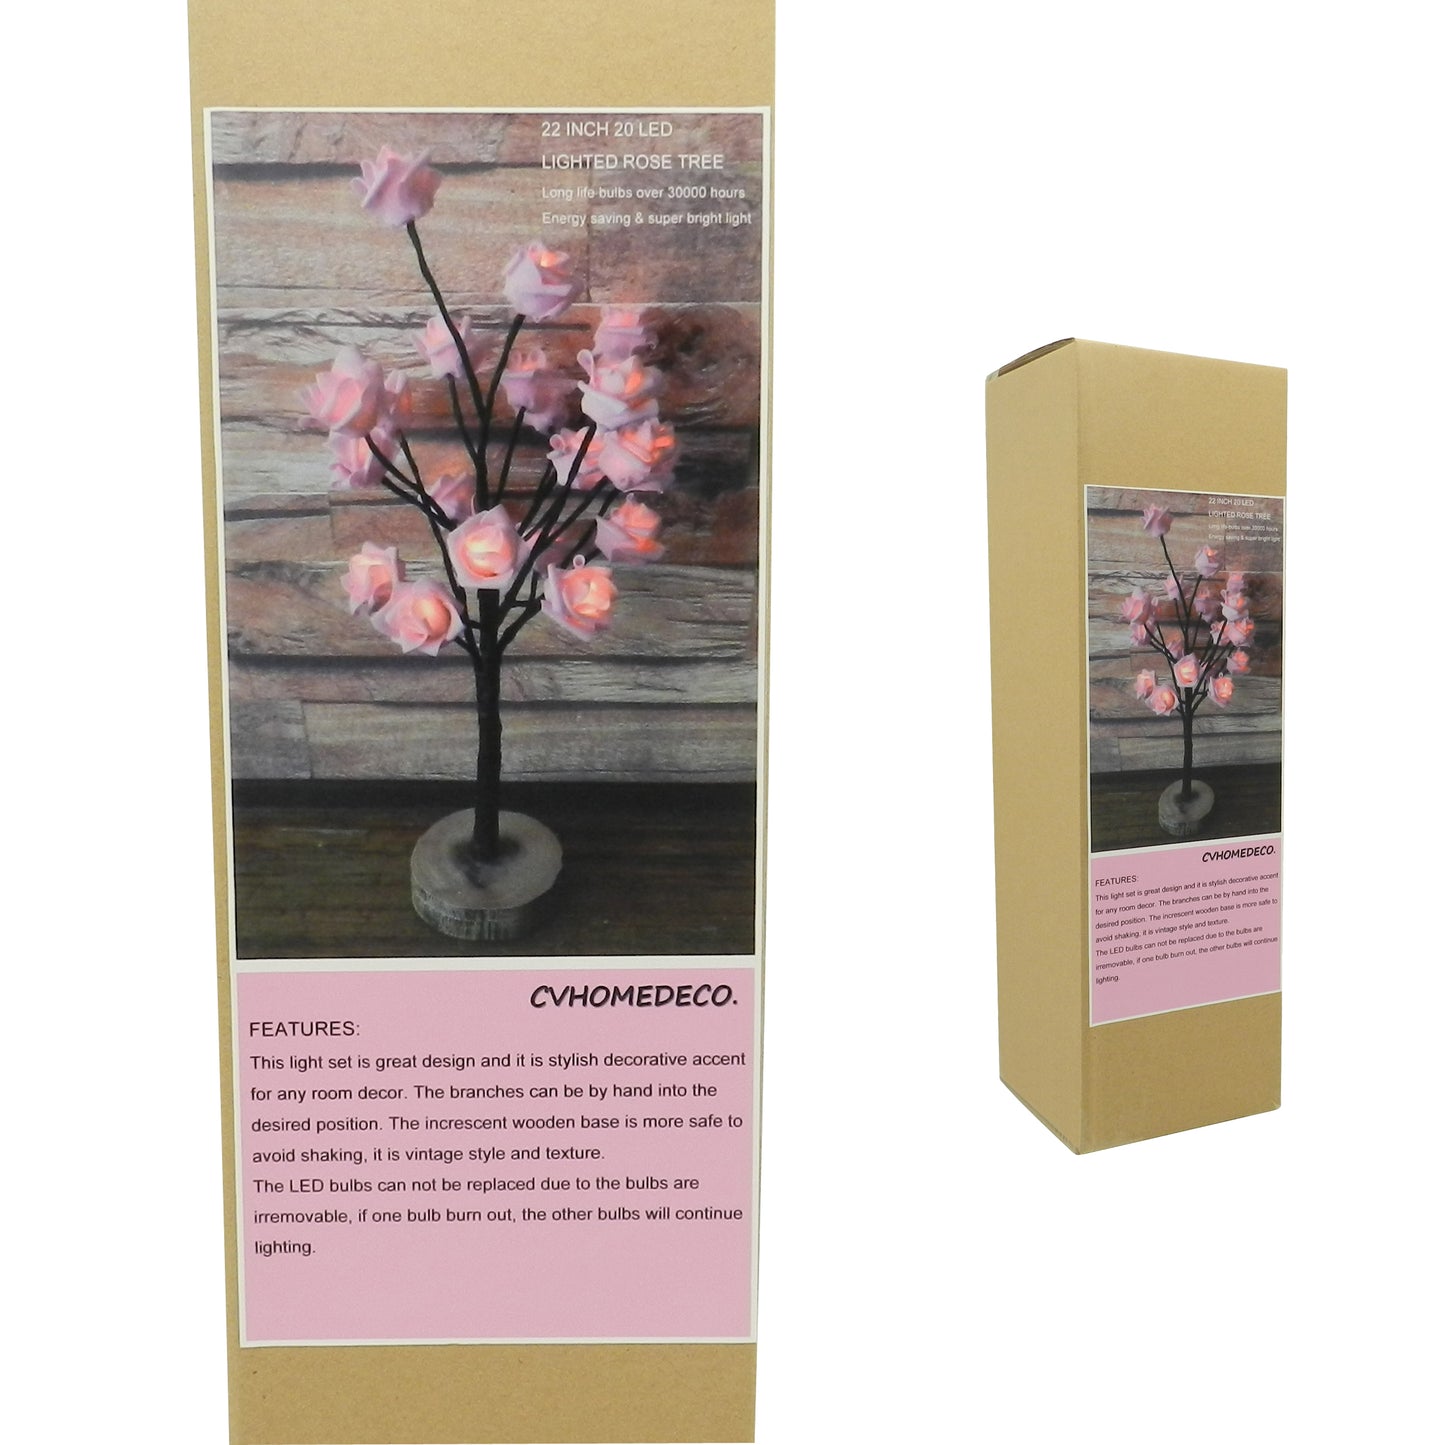 CVHOMEDECO. Battery Operated w/Timer Lighted Pink Rose Tree Tabletop LED Light, 20 Warm White LEDs, Rustic Vintage Wooden base, For Home/Party/ Wedding/Festival/Indoor Decoration, 22 Inch